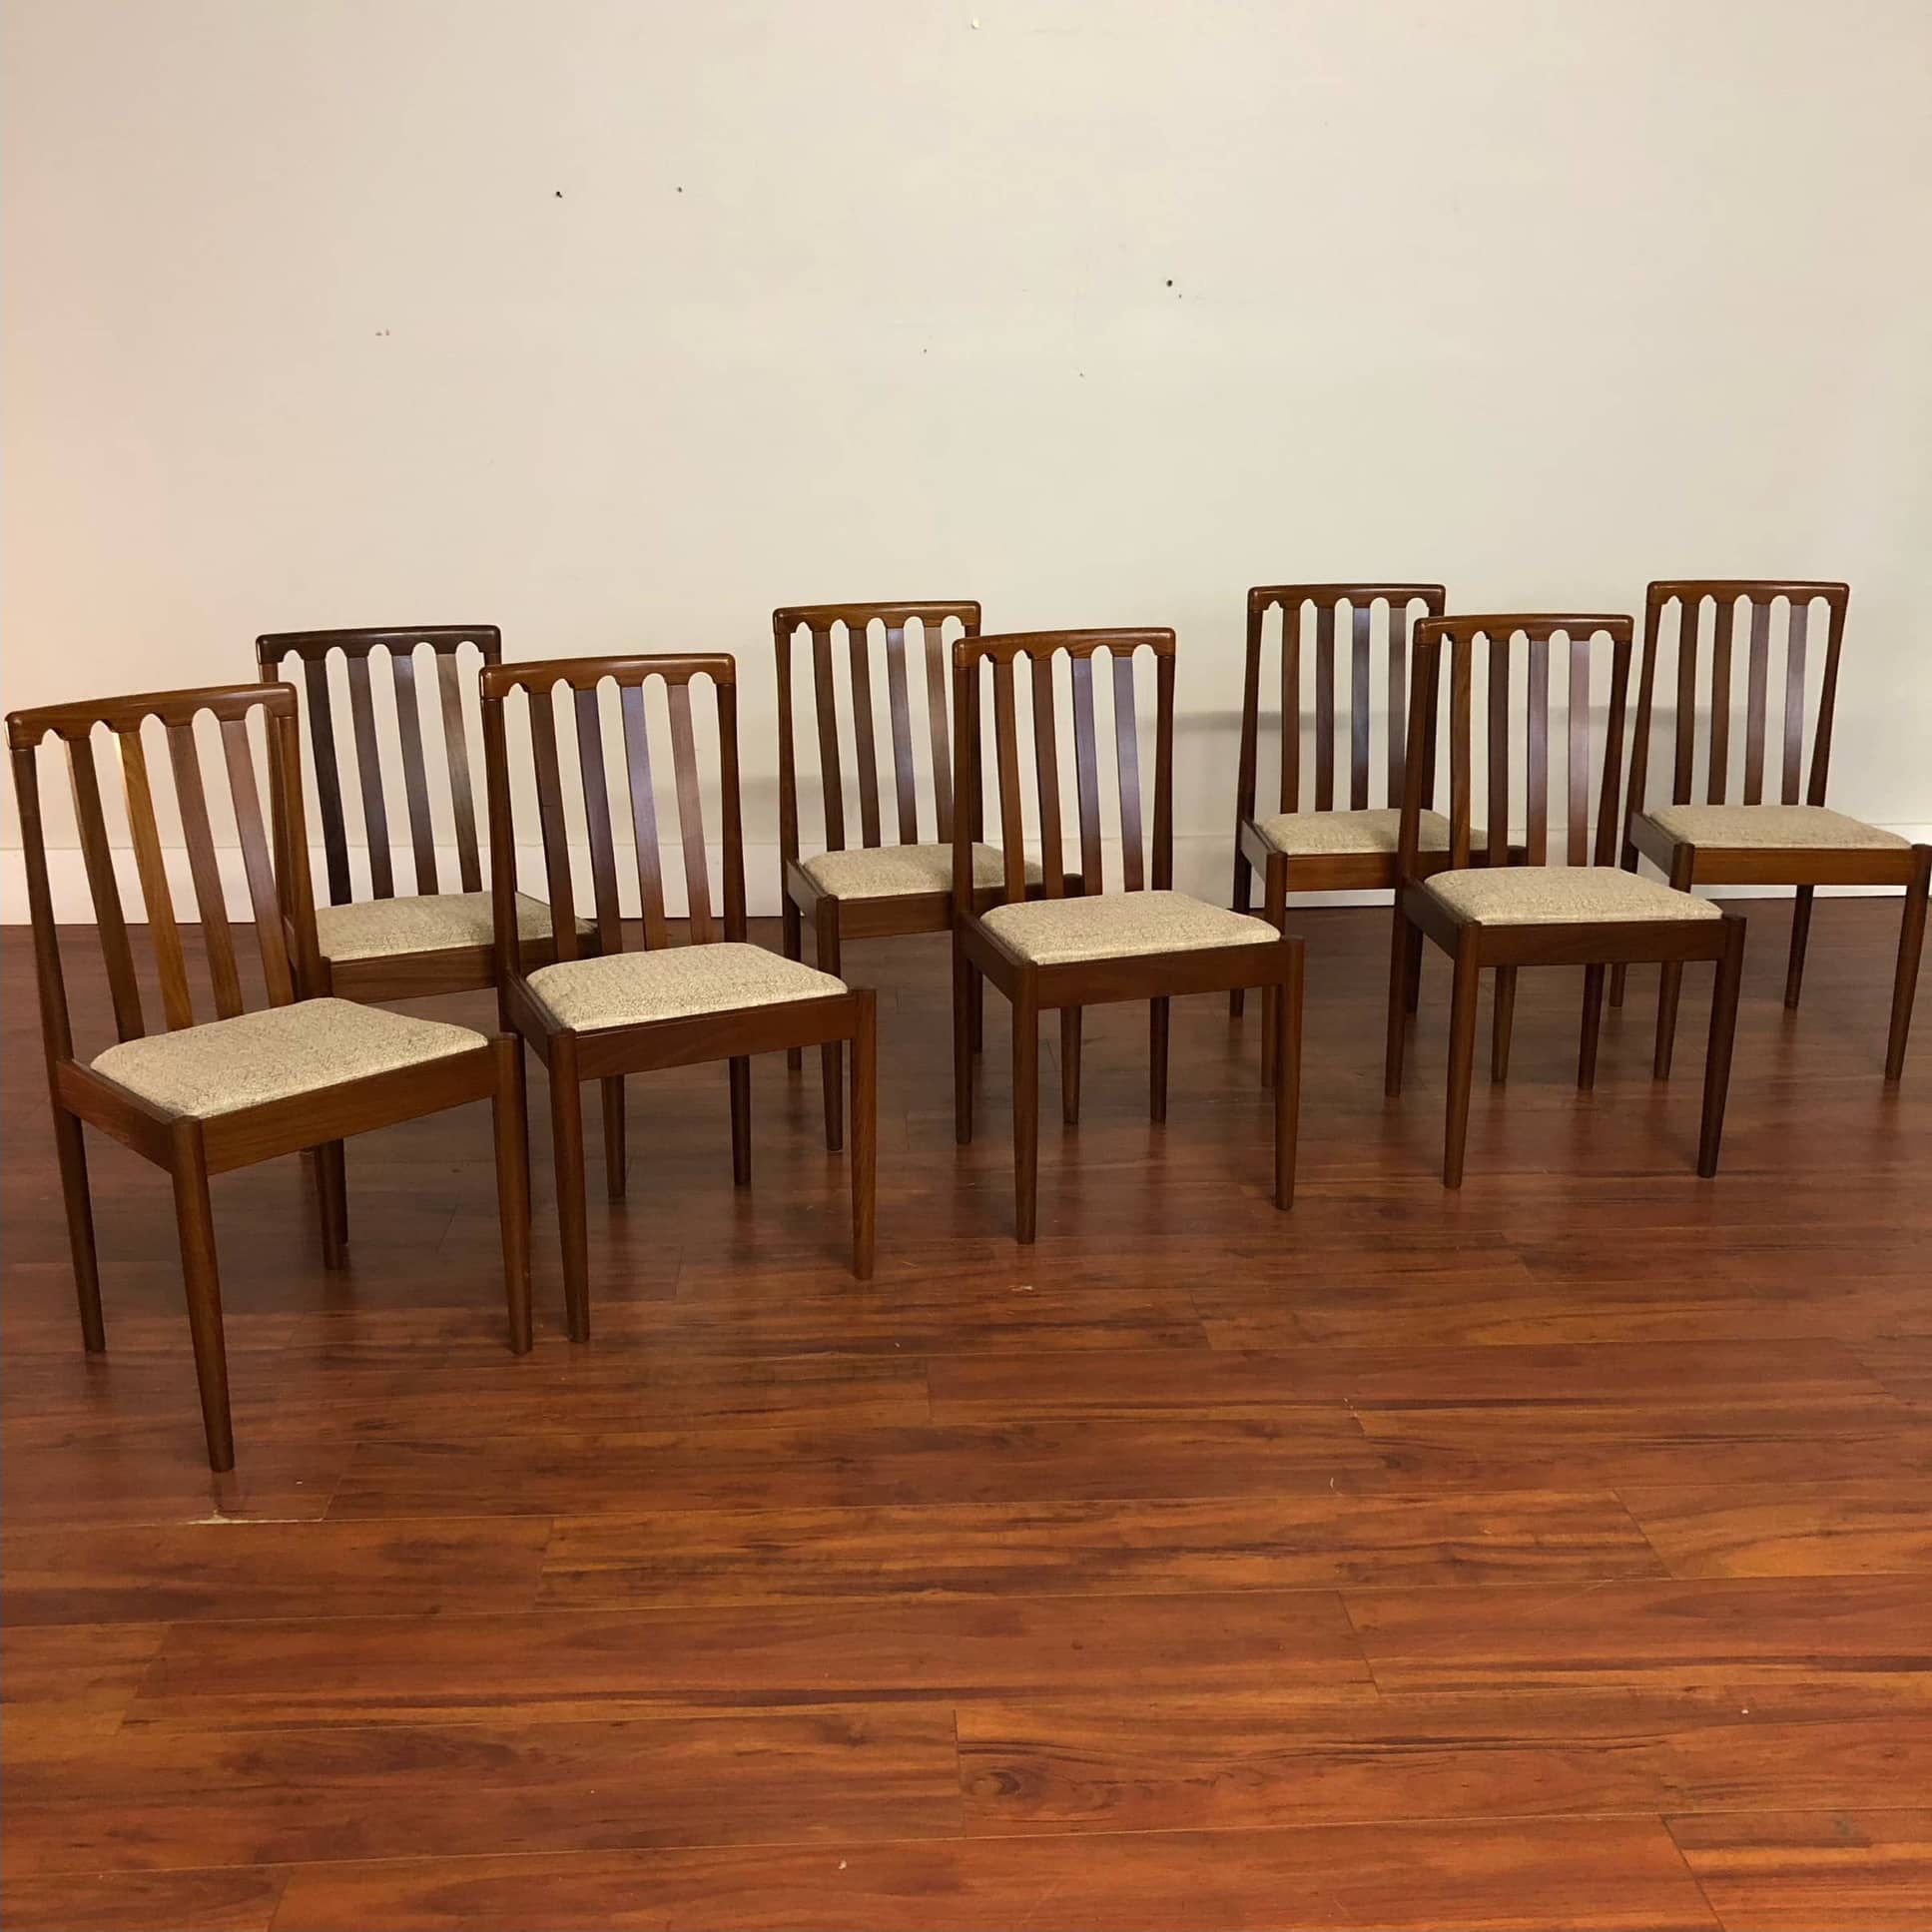 Vintage Slat Back Dining Chairs, Set of 8 - Many More Items In Stock!